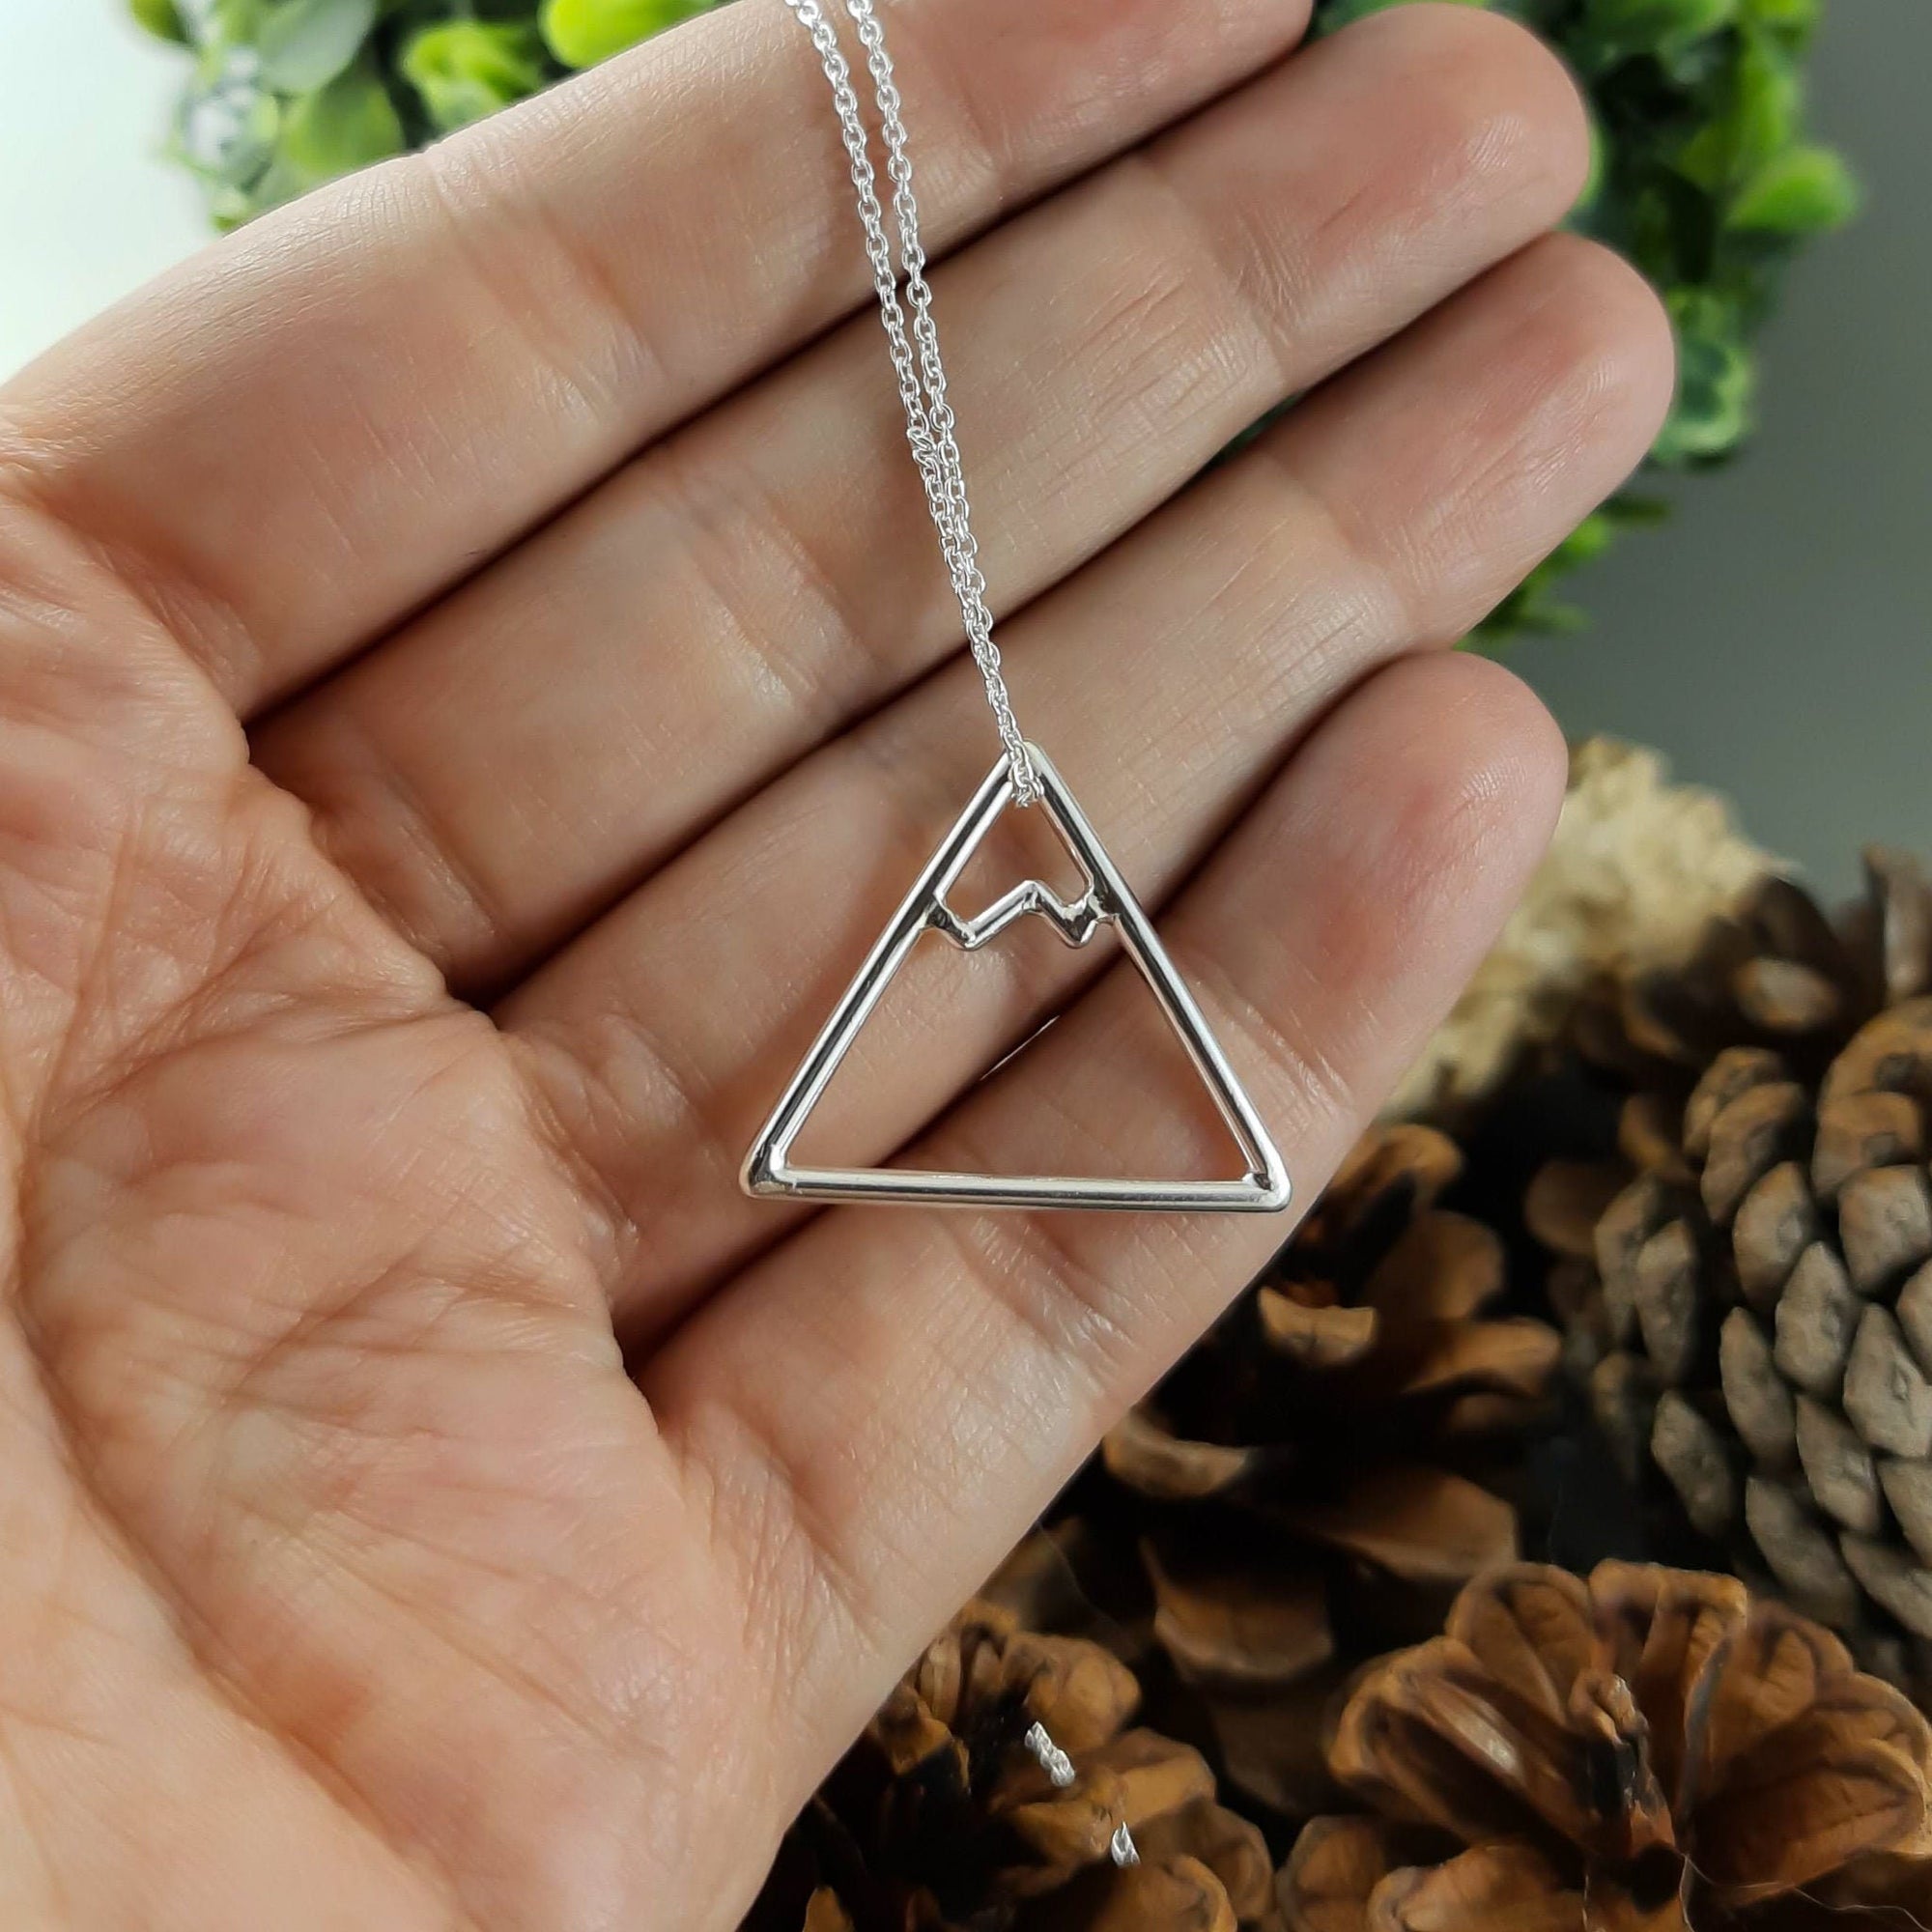 Simplicity Mountain Necklace in Sterling Silver